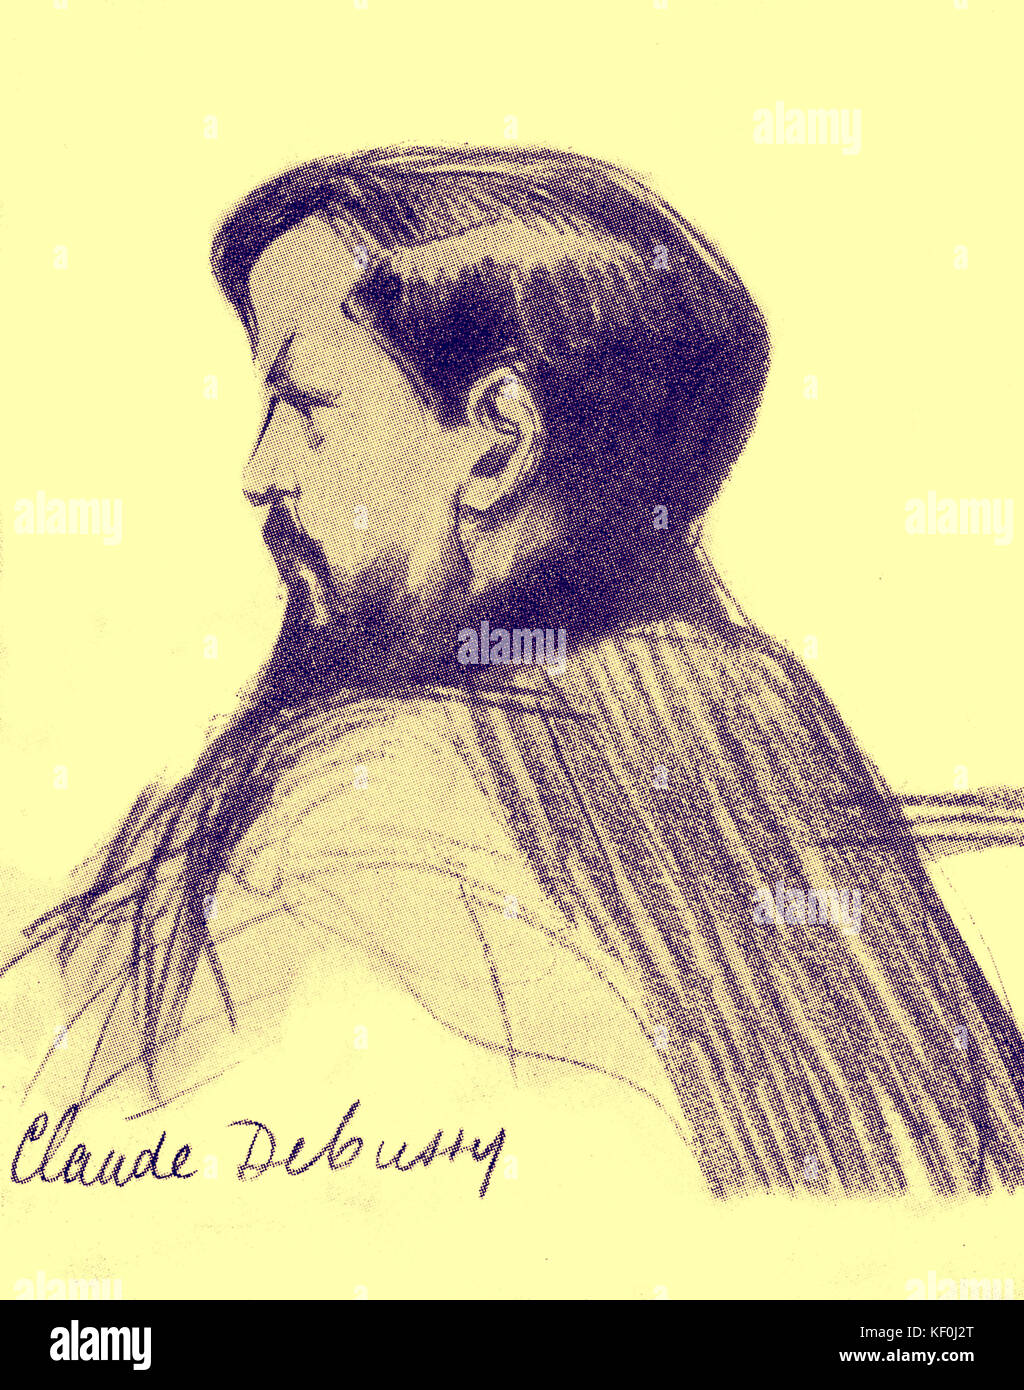 Claude Debussy - line drawing portrait by Henry Detouche, early 20th century. CD: French composer, 22 August 1862 - 25 March 1918. Tinted version. Stock Photo